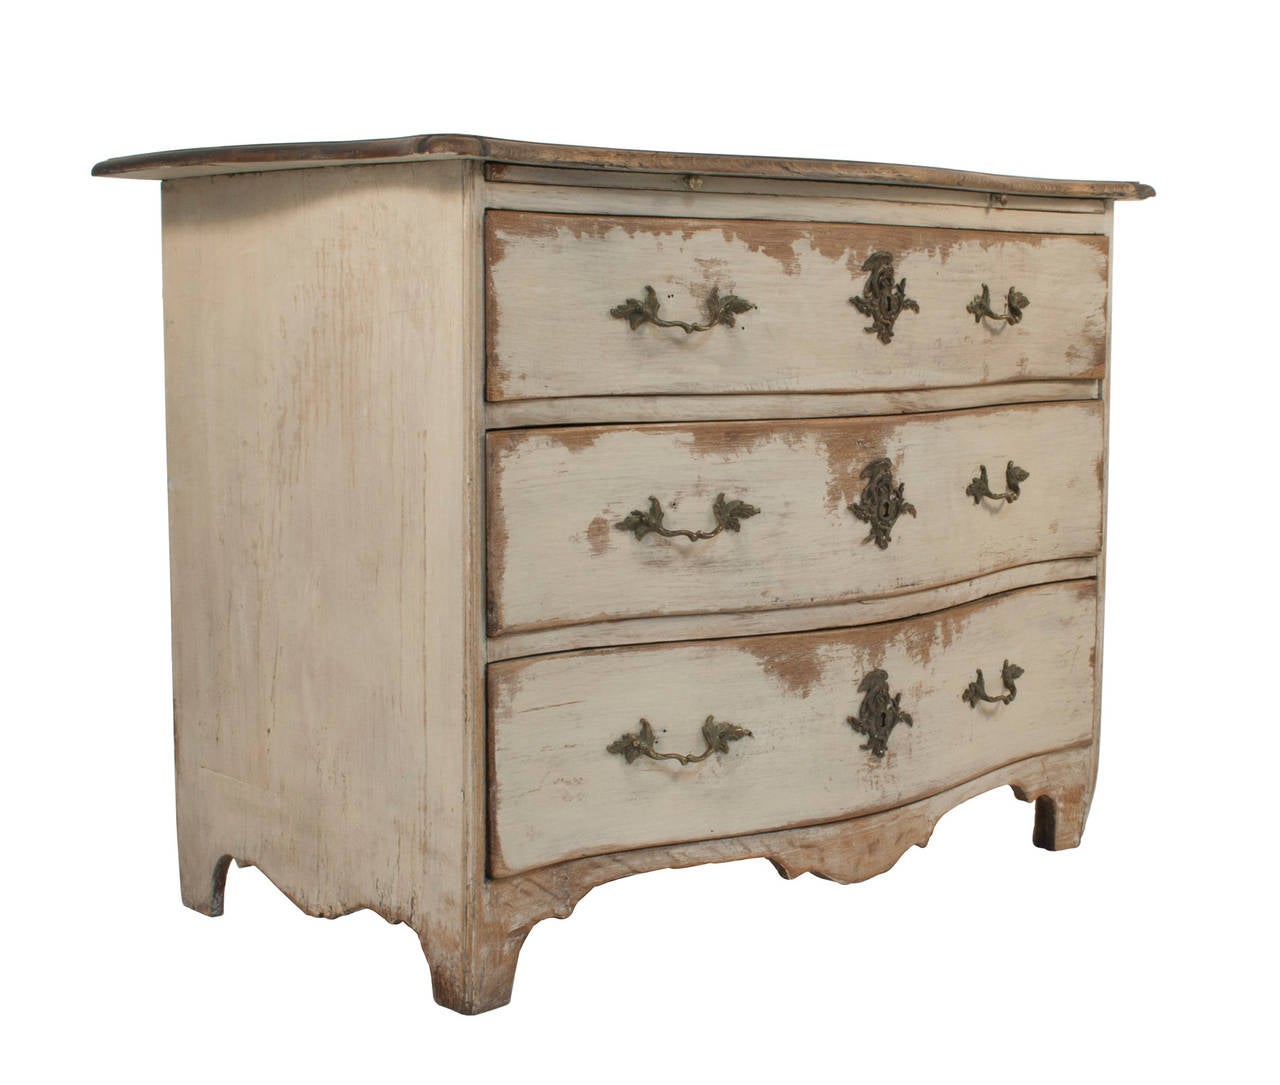 Three-drawer Baroque chest in a worn grey and black patina.